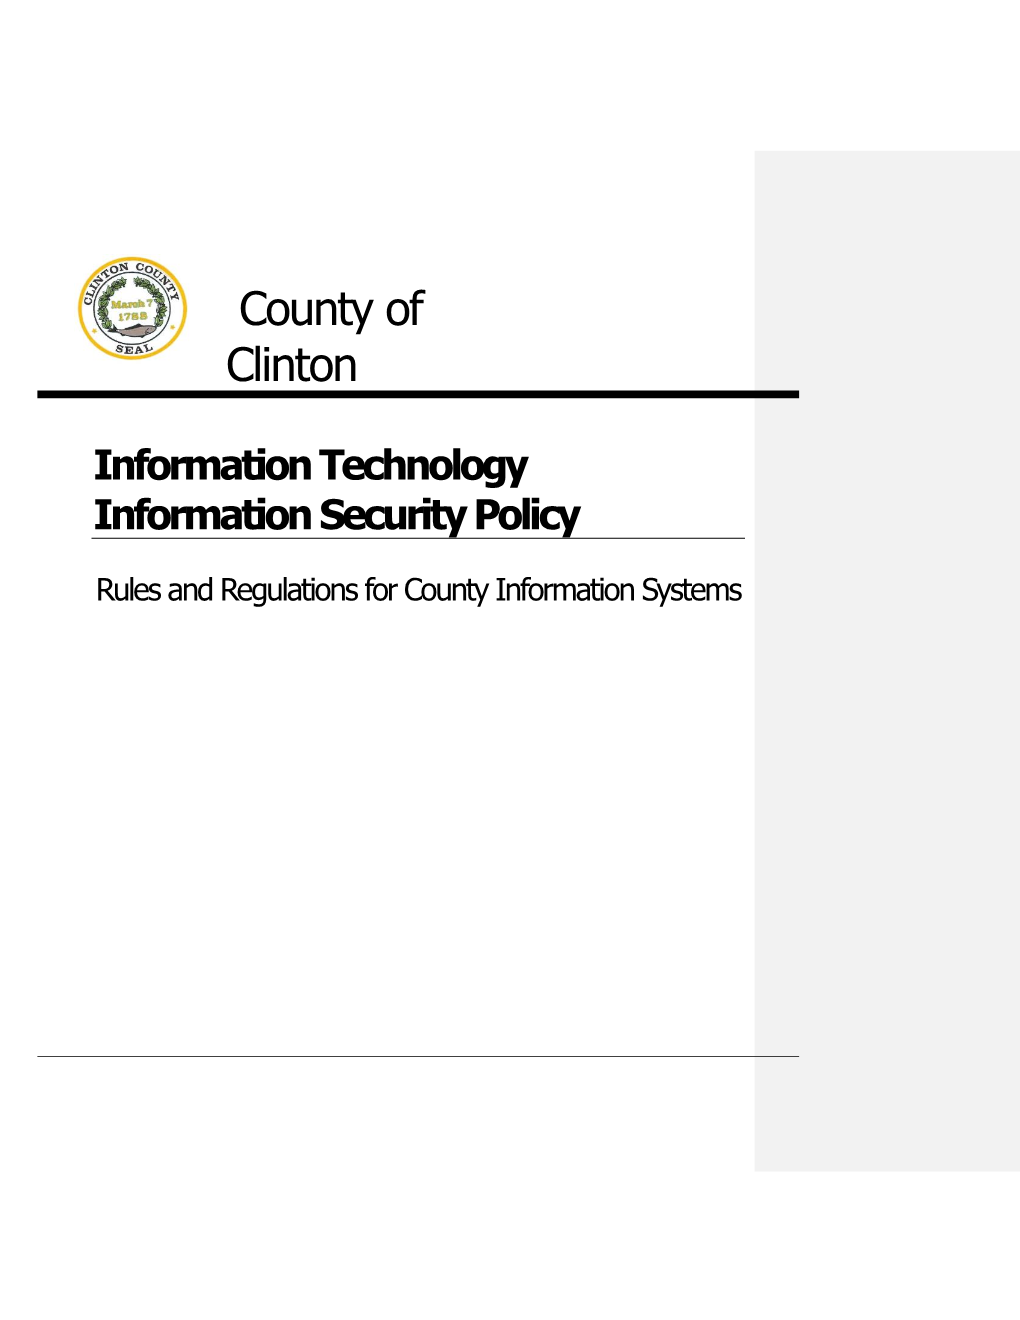 Information Technology Security Policy 2012